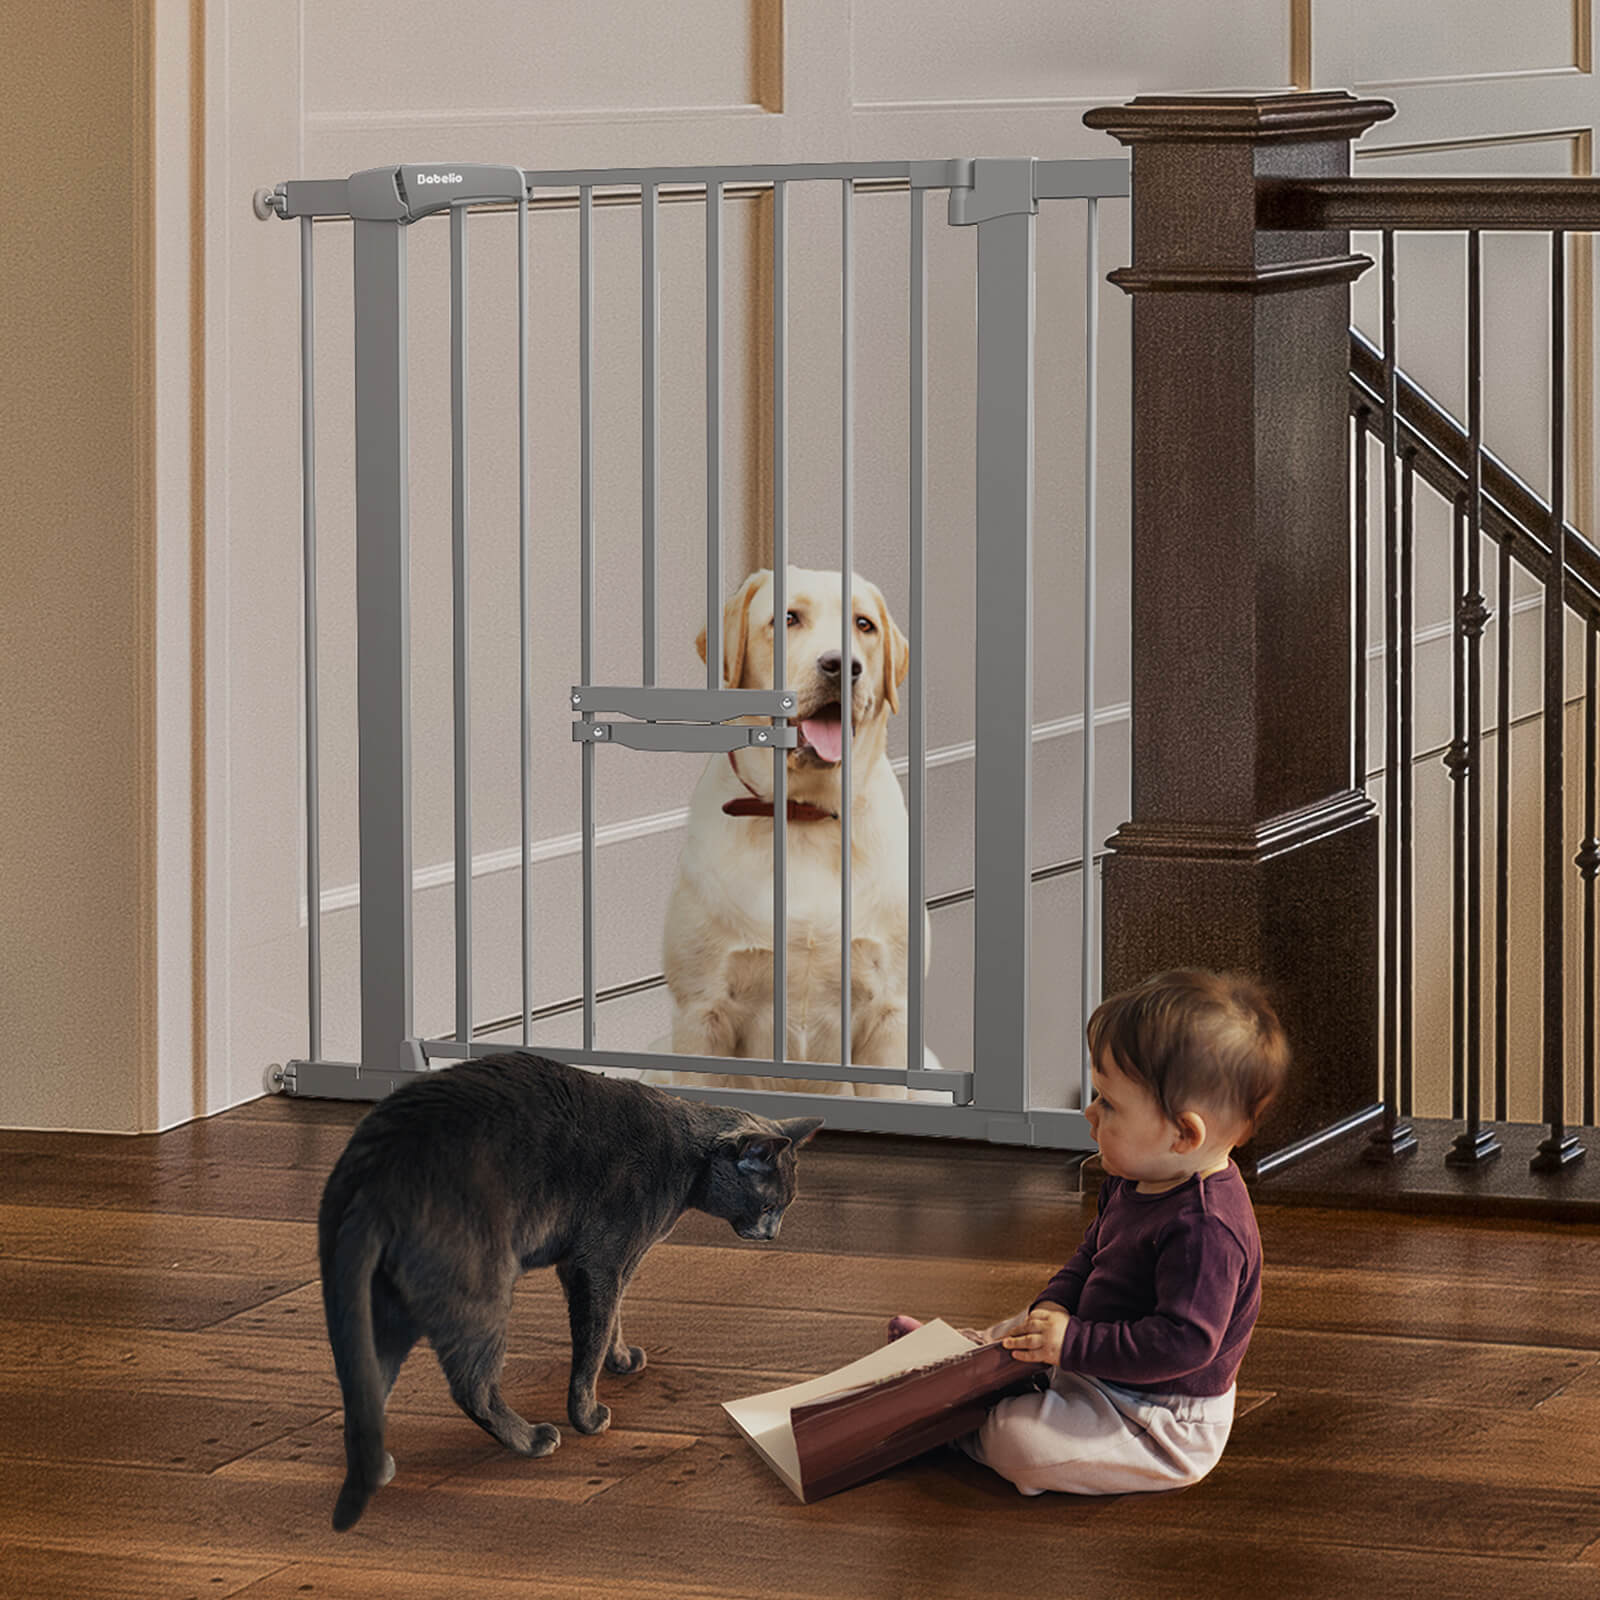 BABELIO 30" Tall Baby Gate with Adjustable Cat Door – 29-40" Wide, Metal Safety Gate for Stairs & Doorways, Auto-Close Feature, Tool-Free Install